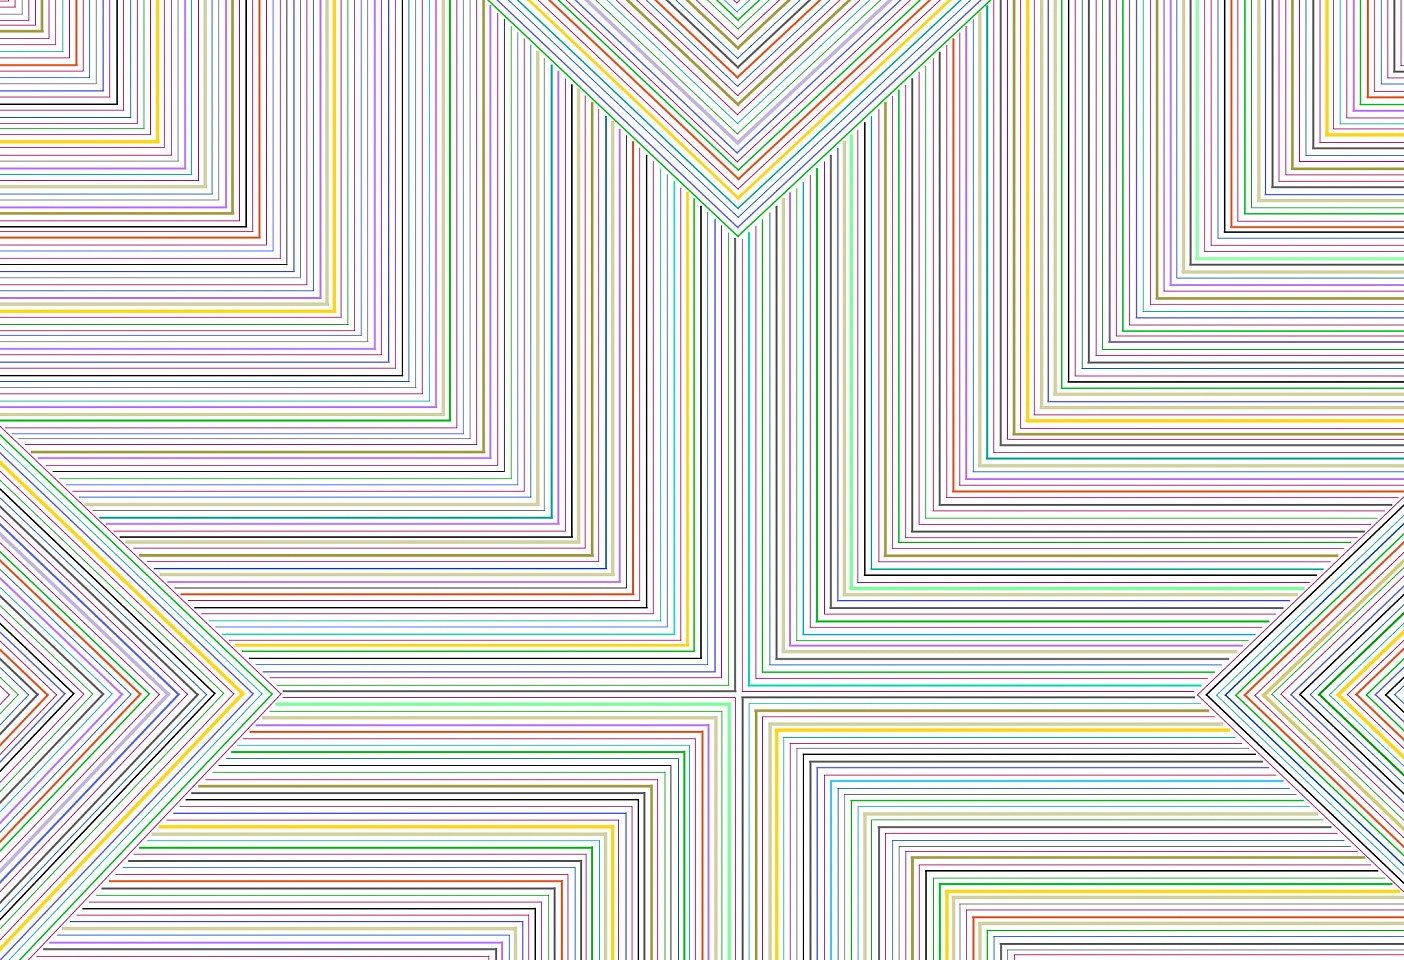 Dane Albert, Color Sticks #37, 2023
Acrylic on canvas (Concept), 48 x 72 in. (121.9 x 182.9 cm)
Series of colored lines and shapes in multiple configurations
DA.2023.sticks-037